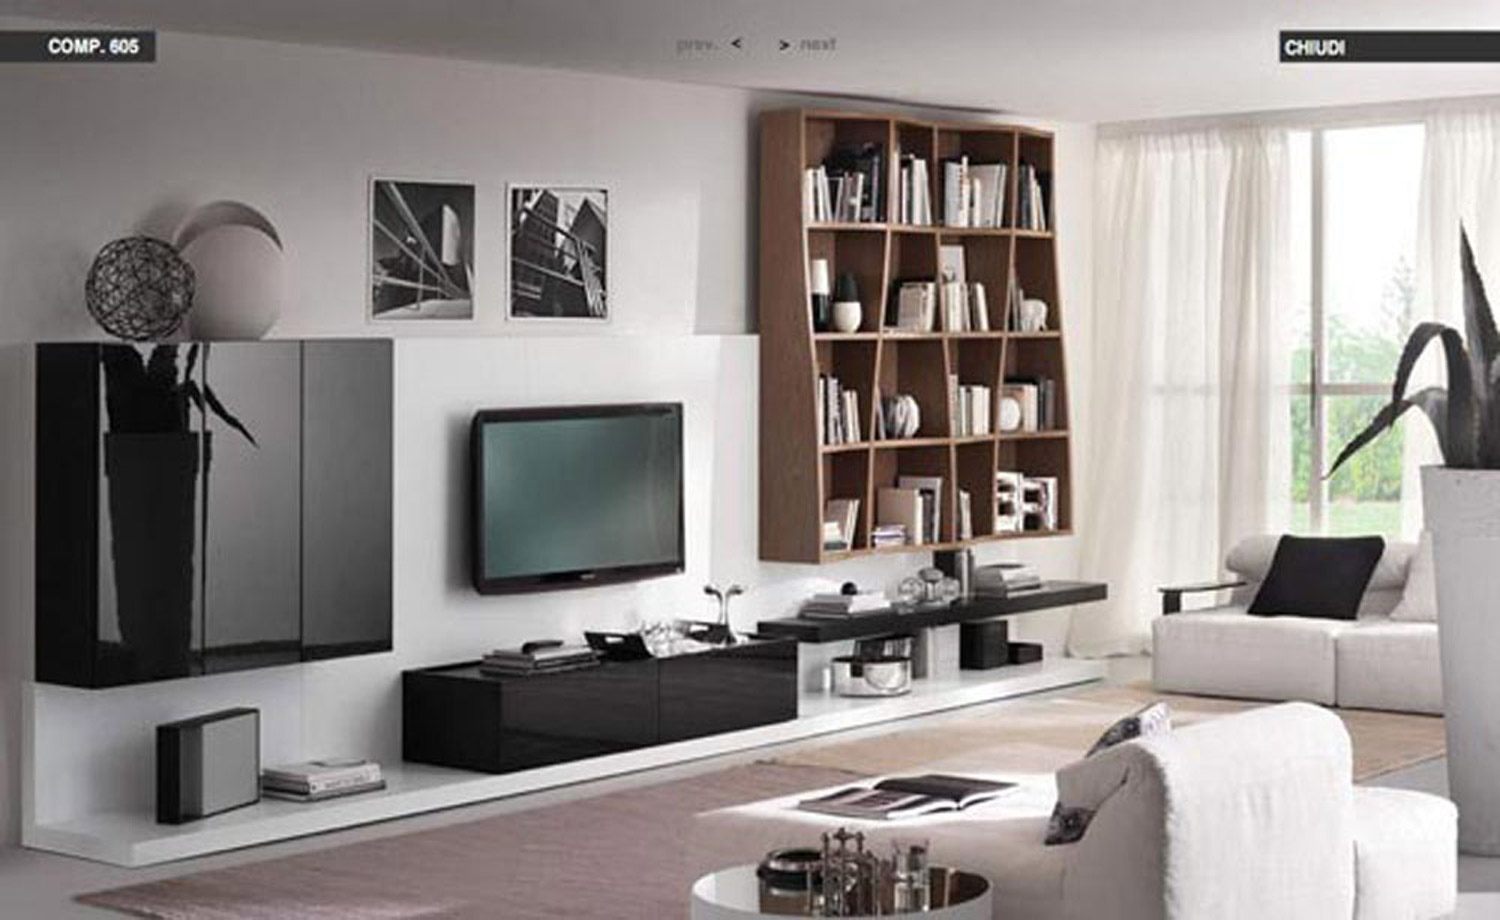 Living Room Tv Entrancing Living Room Furniture Modern TV Cabinet With Delightful White Sofa Design Also Bookshelf Design For Small Space Along With Easy On The Eye Black Corner Glass Cabinet Idea Living Room Find Suitable Living Room Furniture With Your Style